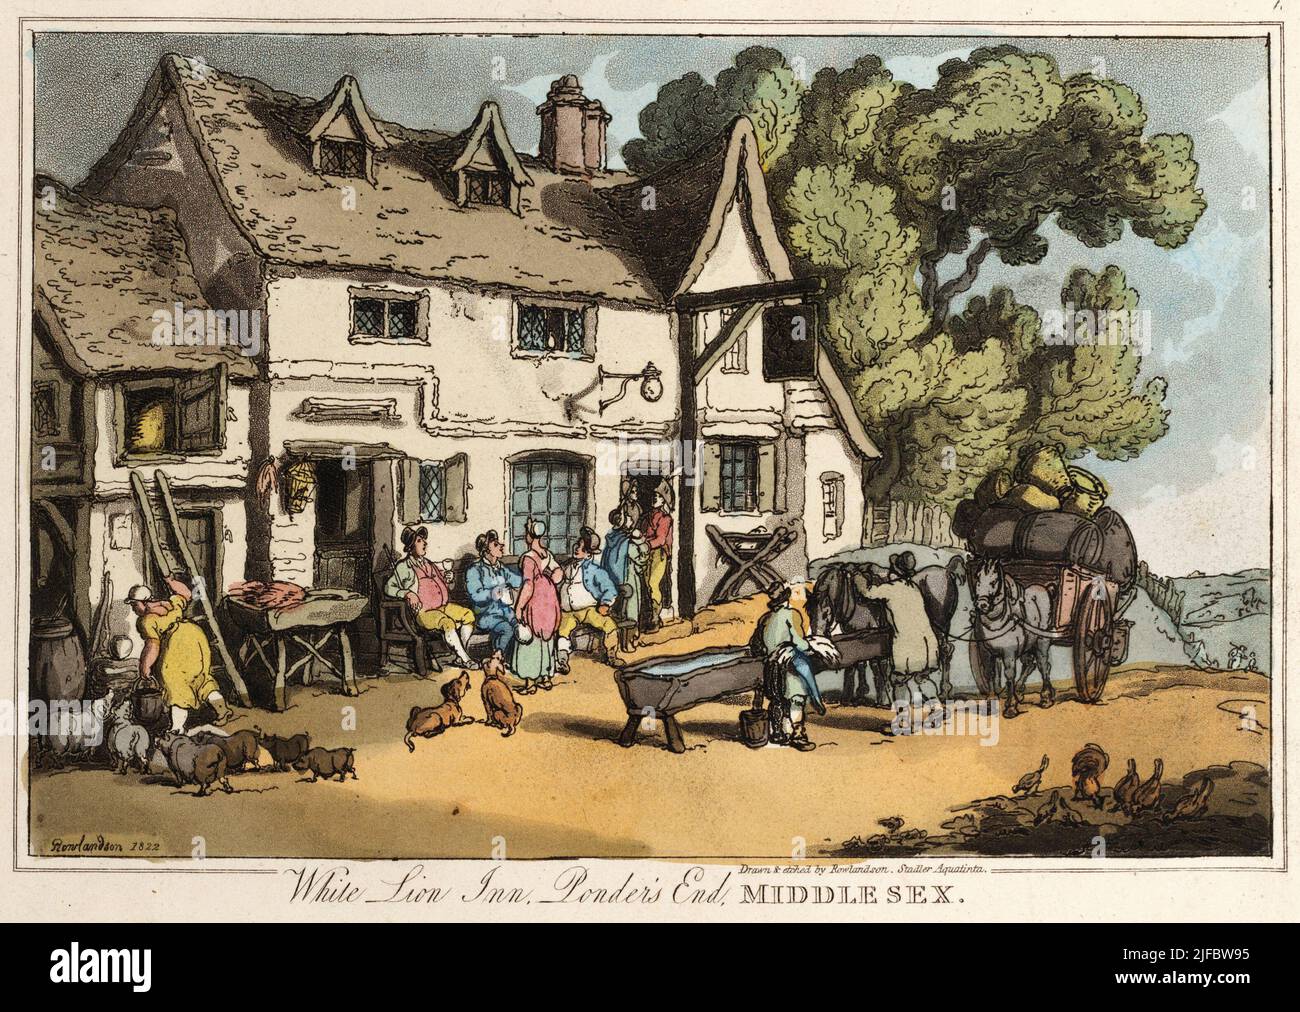 White Lion Inn, Ponders End, London, Middlesex, from “ Sketches from Nature” 1822 Artist: Thomas Rowlandson (1756-1827) an English artist and caricaturist of the Georgian Era. A social observer, he was a prolific artist and print maker.  Credit: Thomas Rowlandson/Alamy Stock Photo